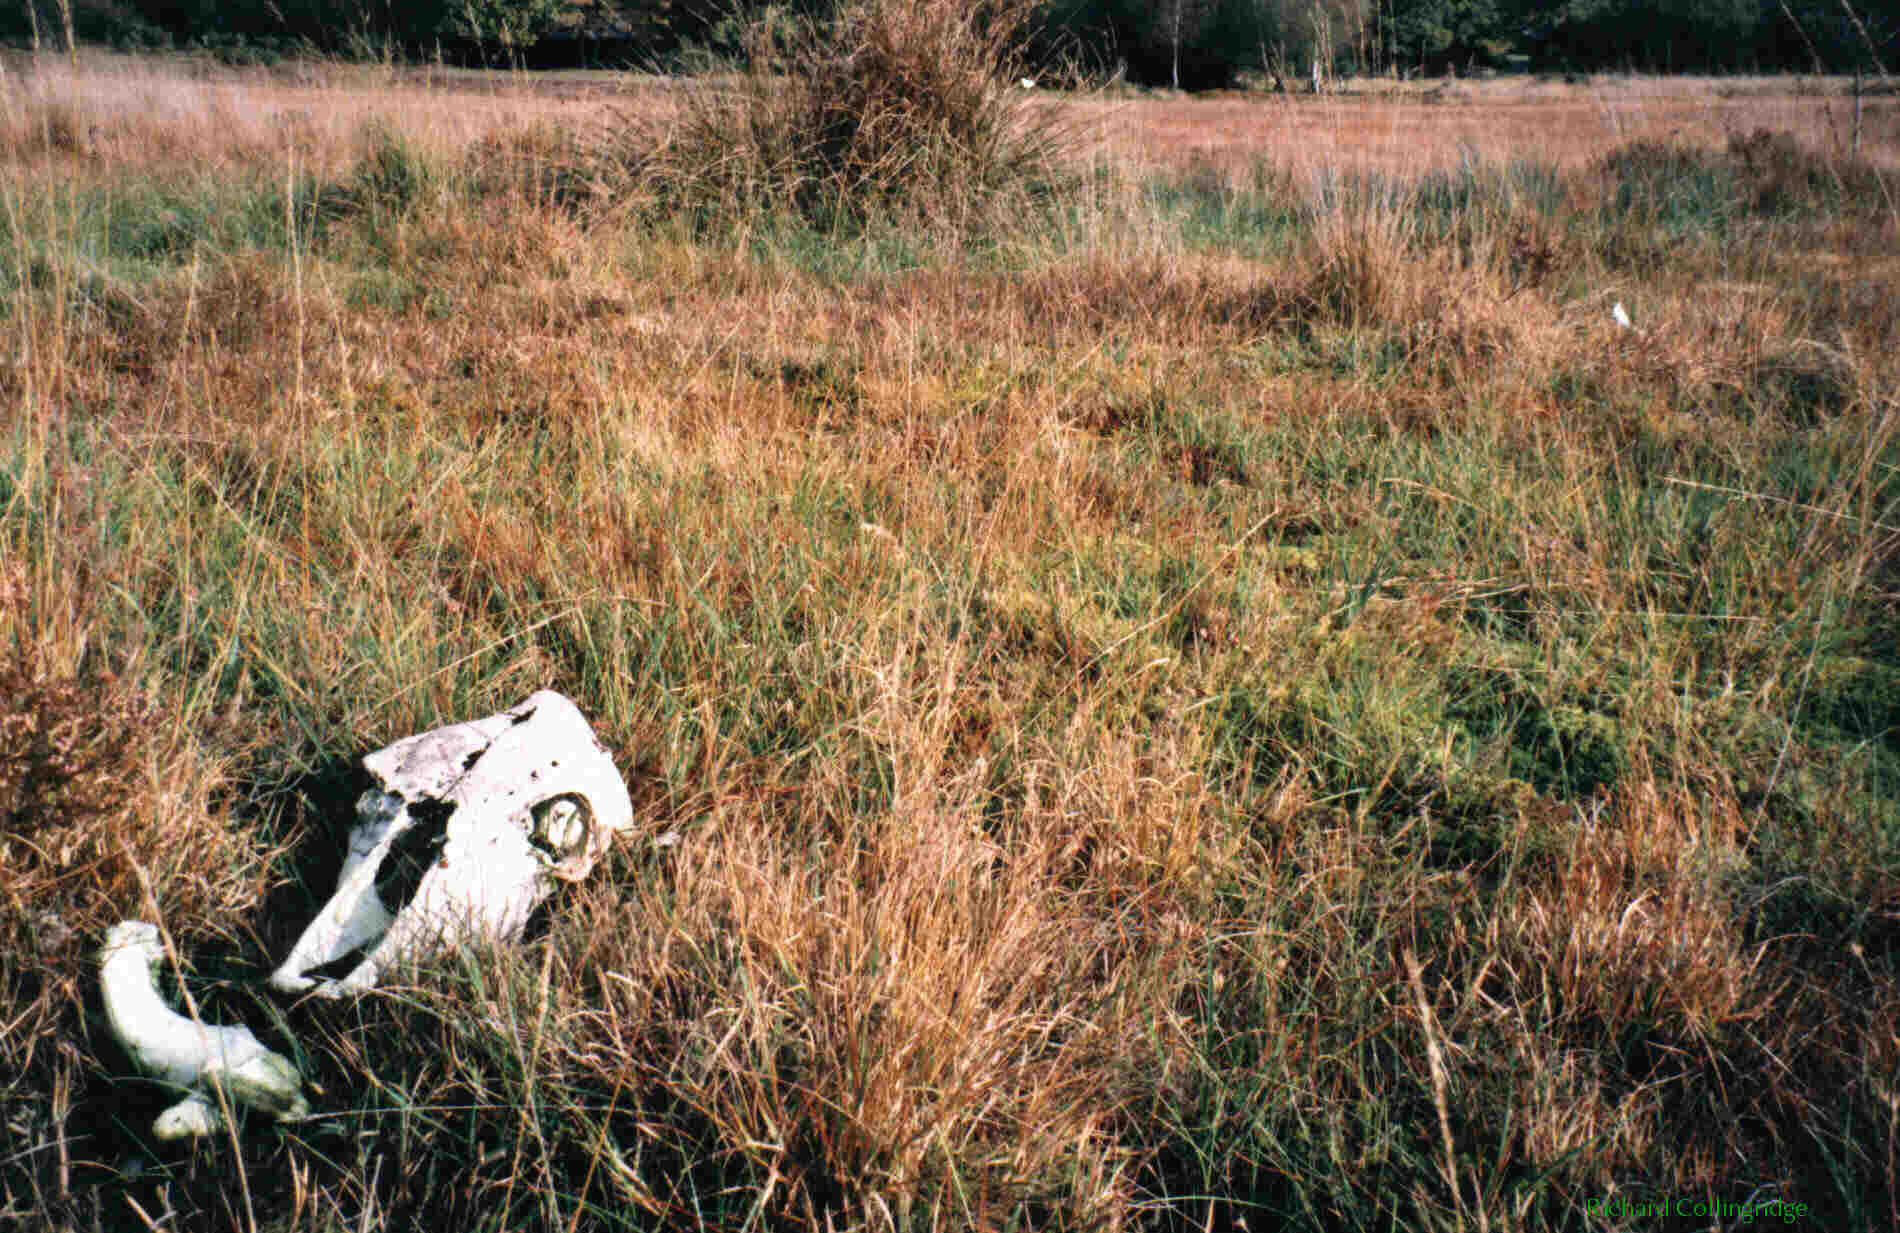 Skull of cow mired in bog showing nutrient effects